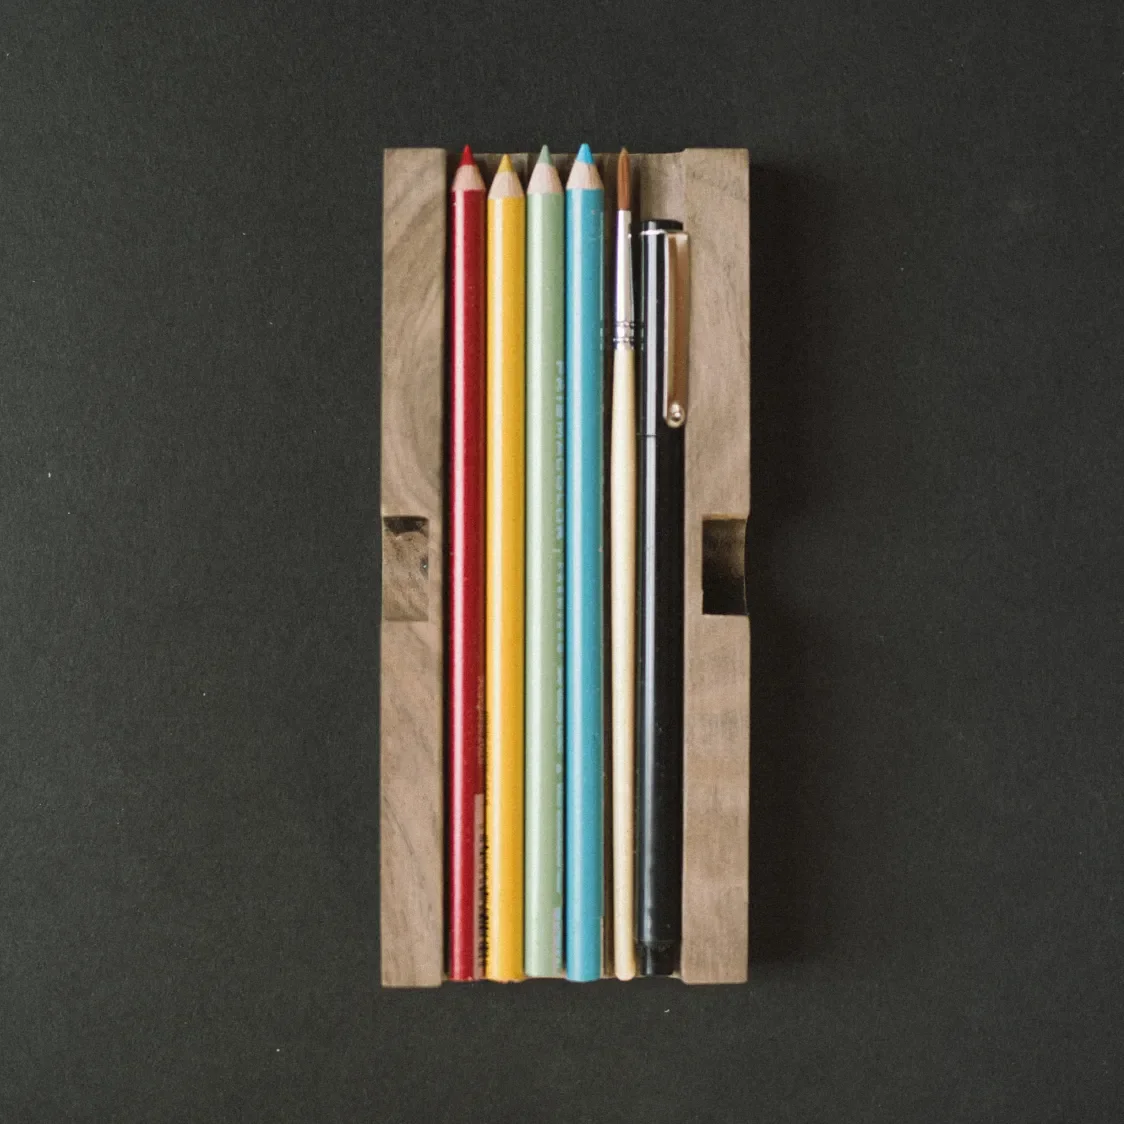 Wooden tray containing colored pencils, a brush and a pen